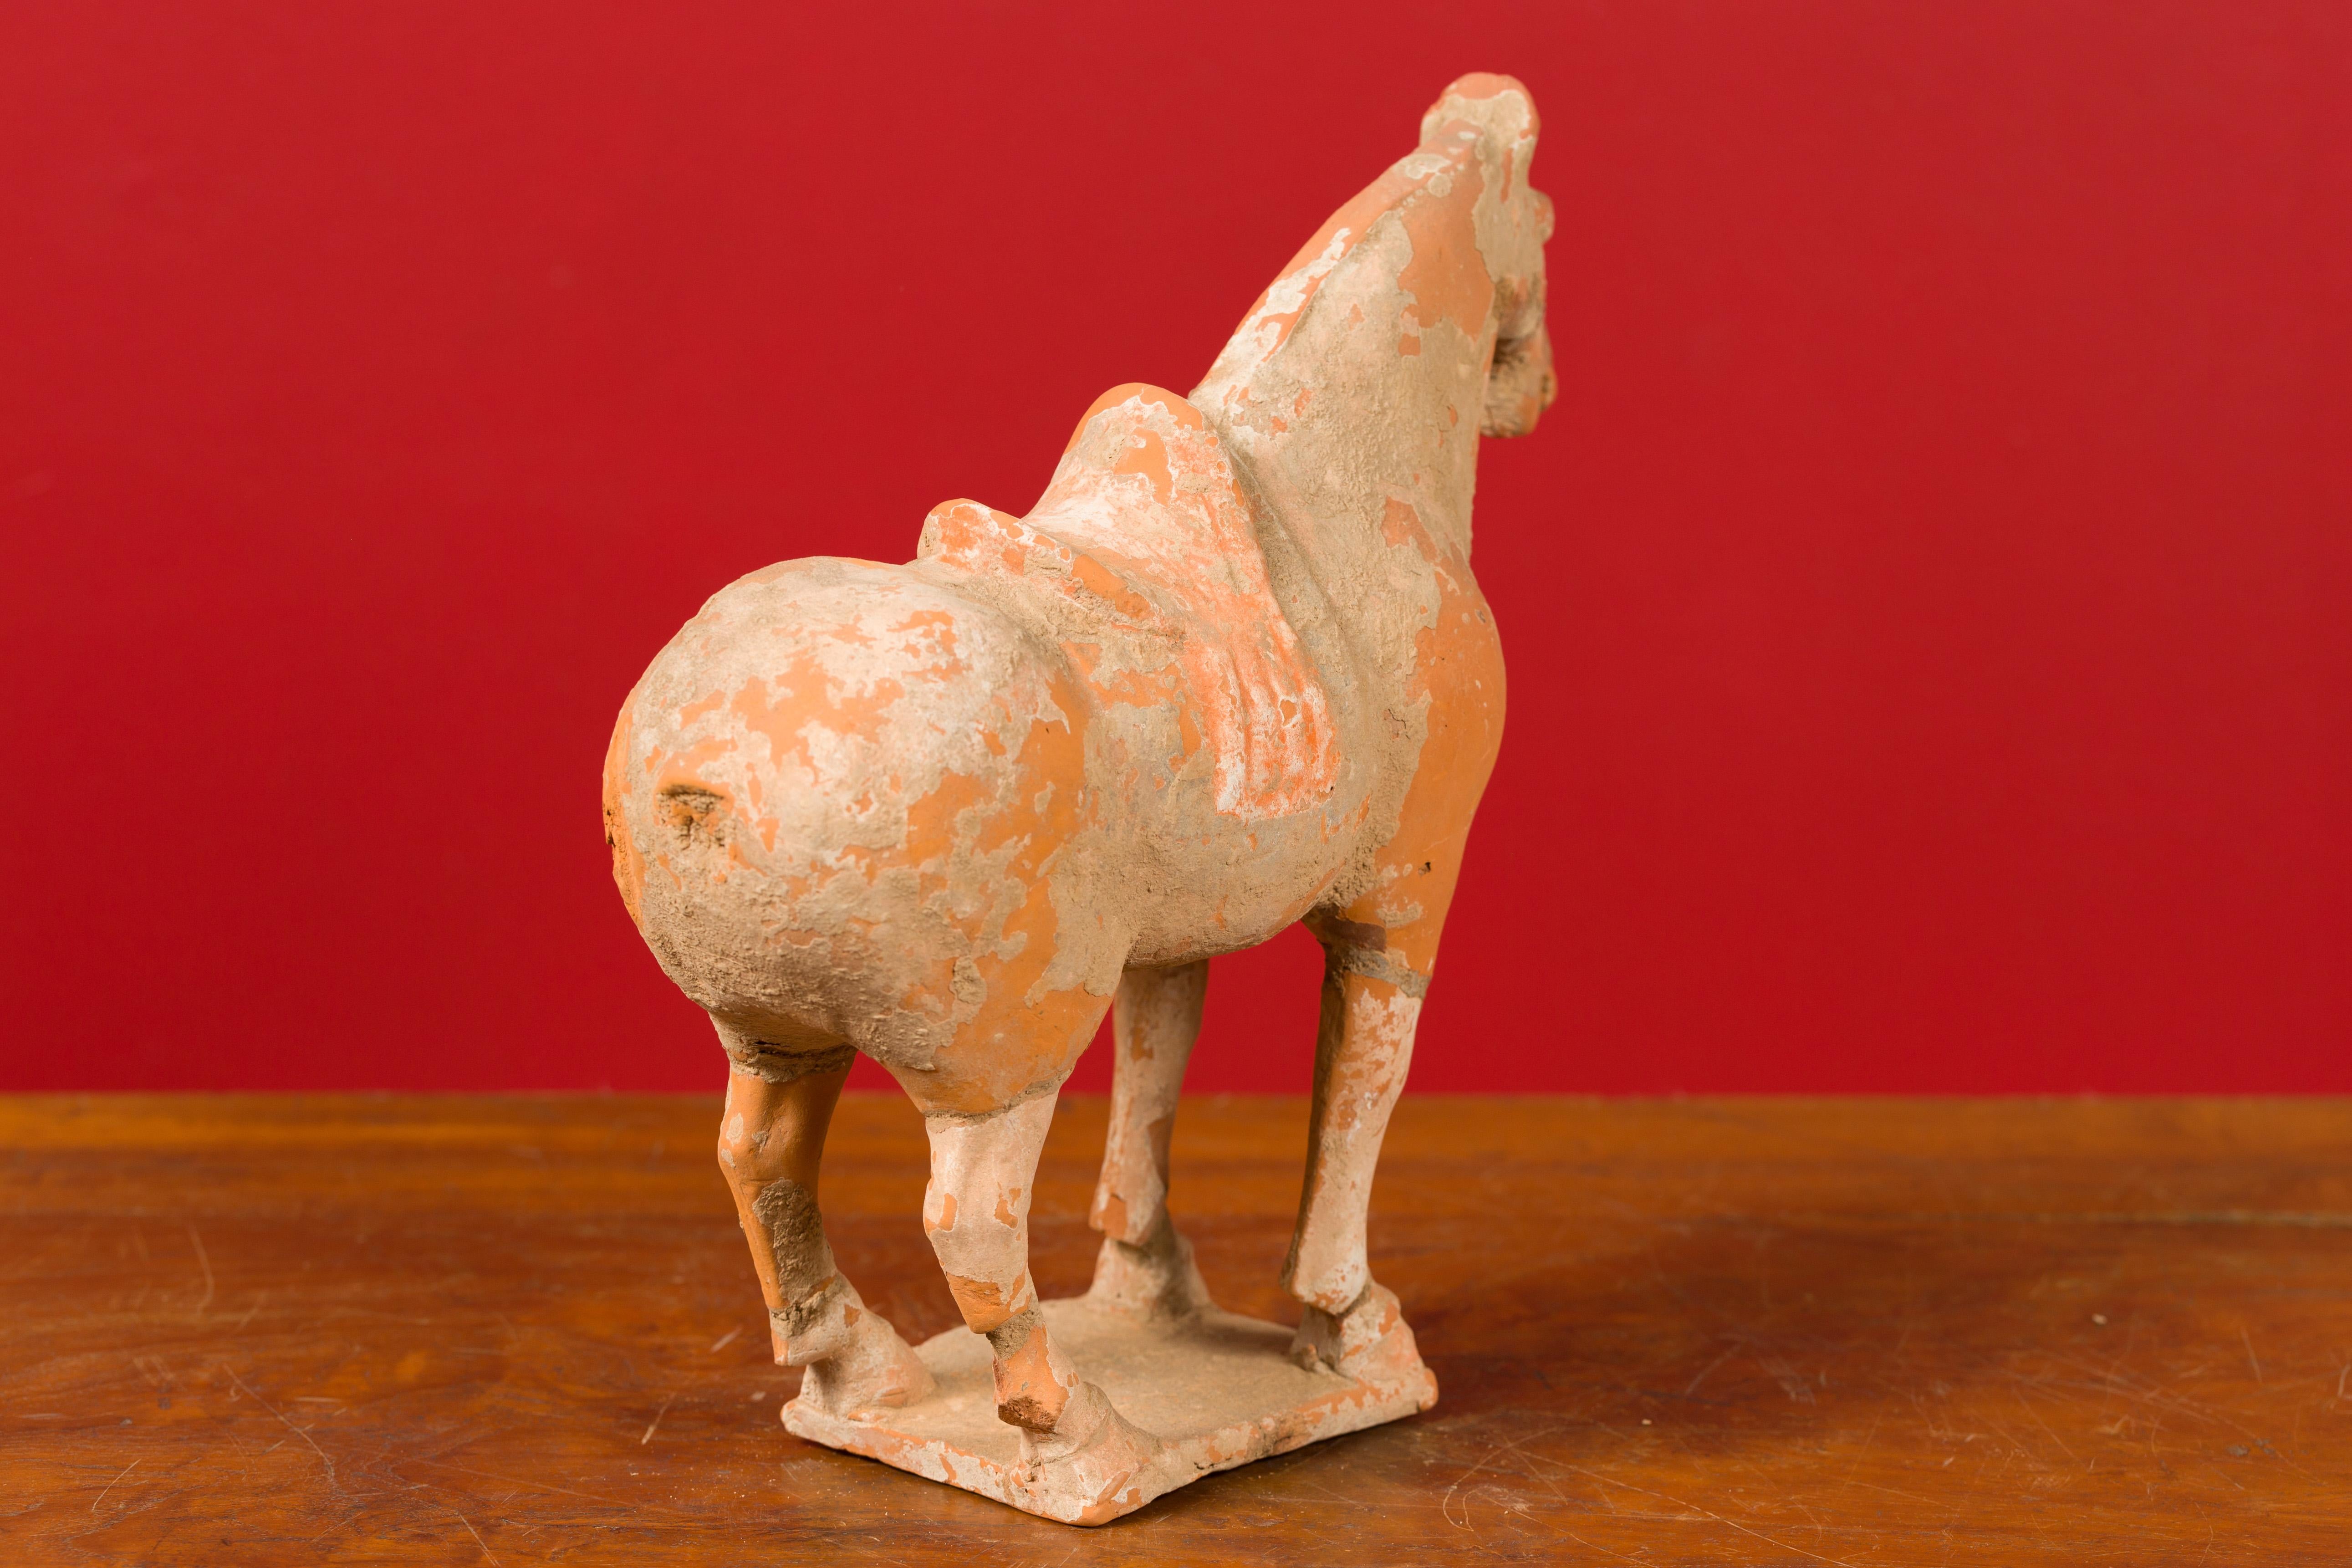 Chinese Han Dynasty Period Mingqi Terracotta Horse with Original Pigmentation 5